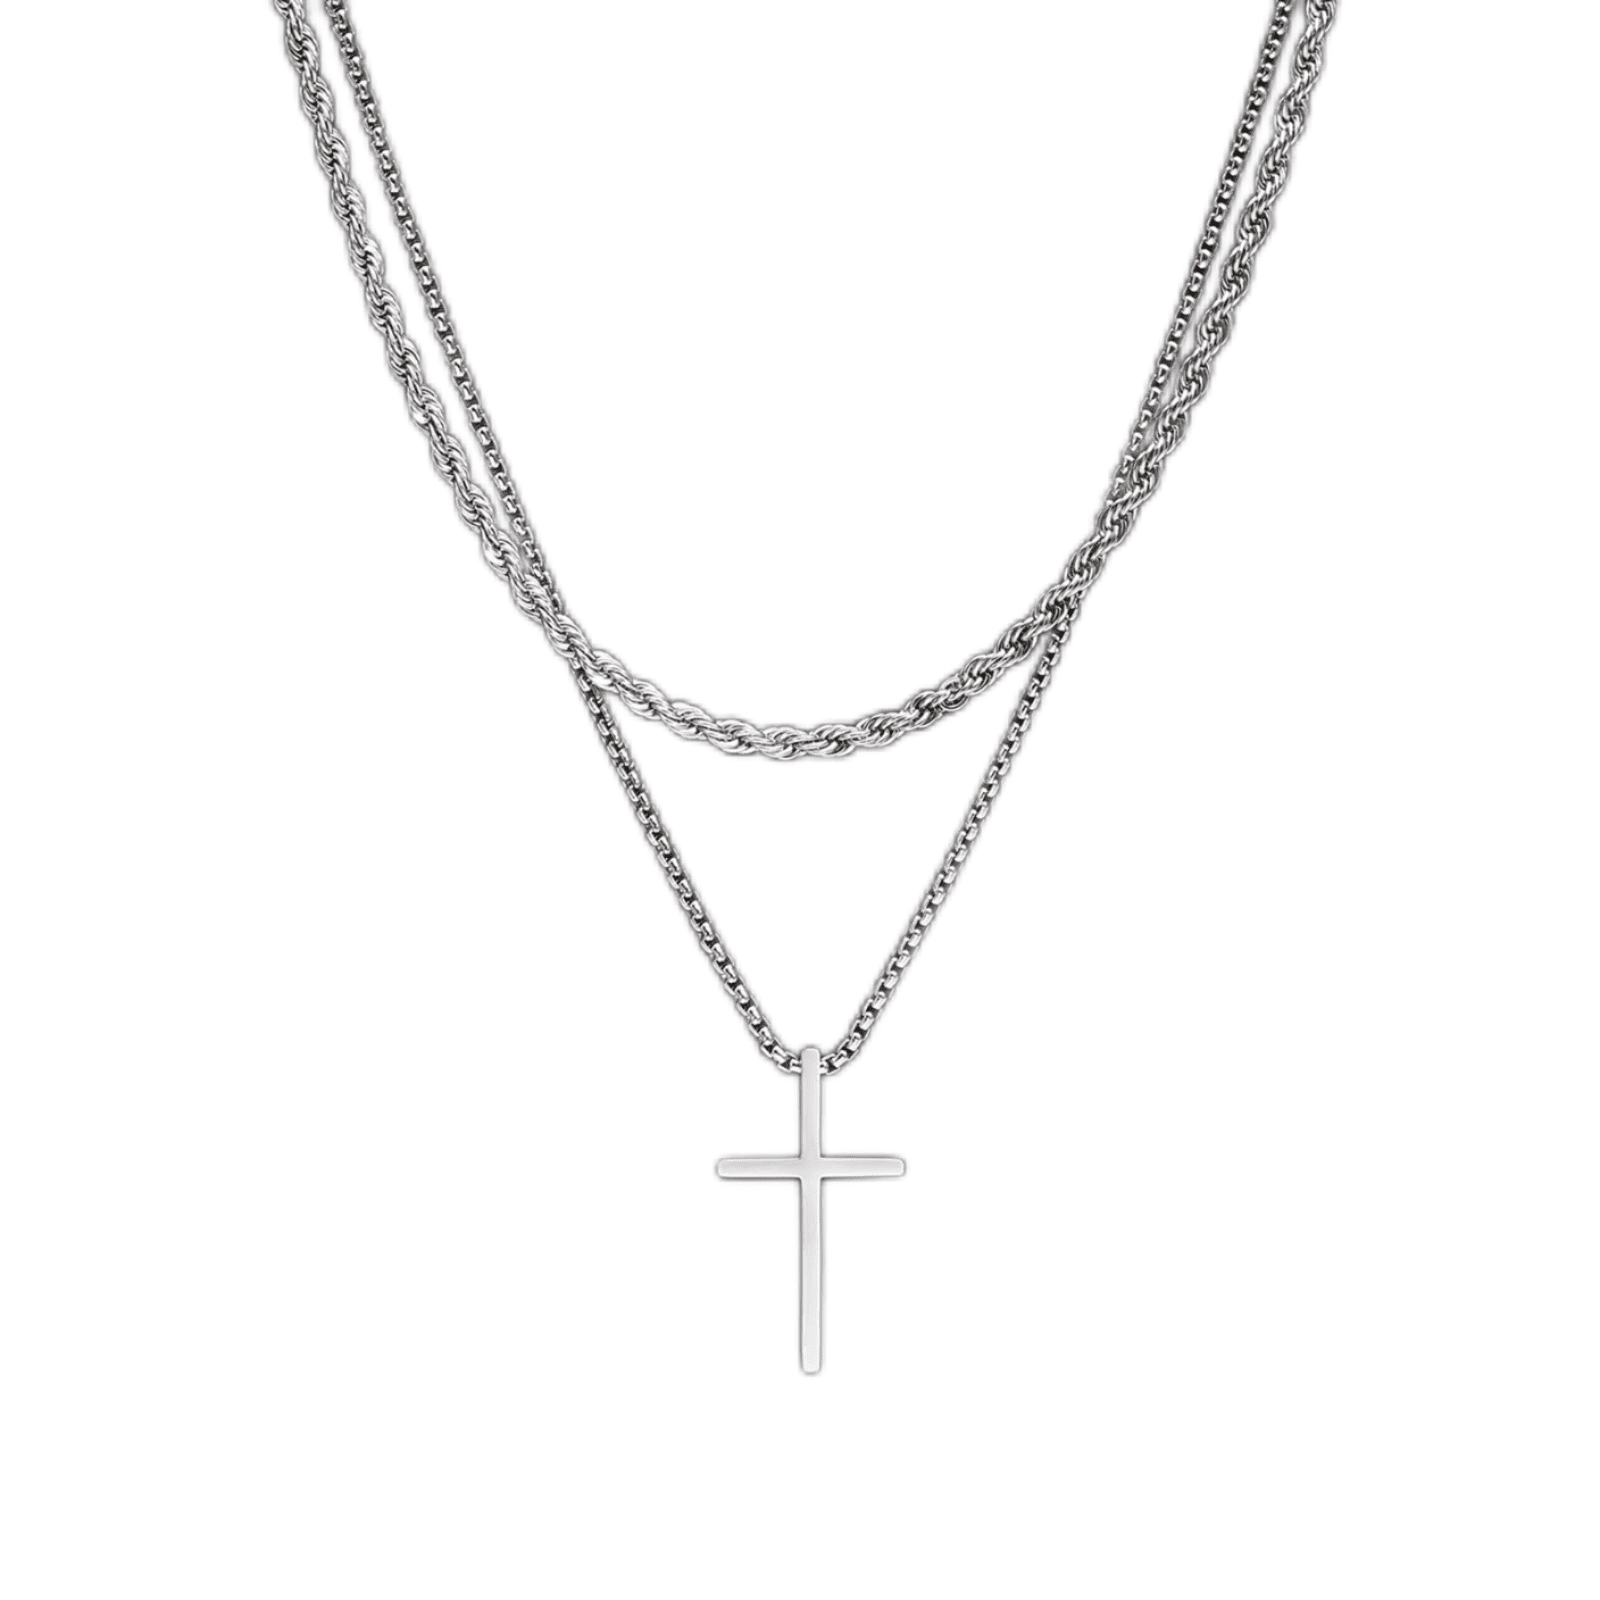 Cross Stainless Steel Necklace & Pendant